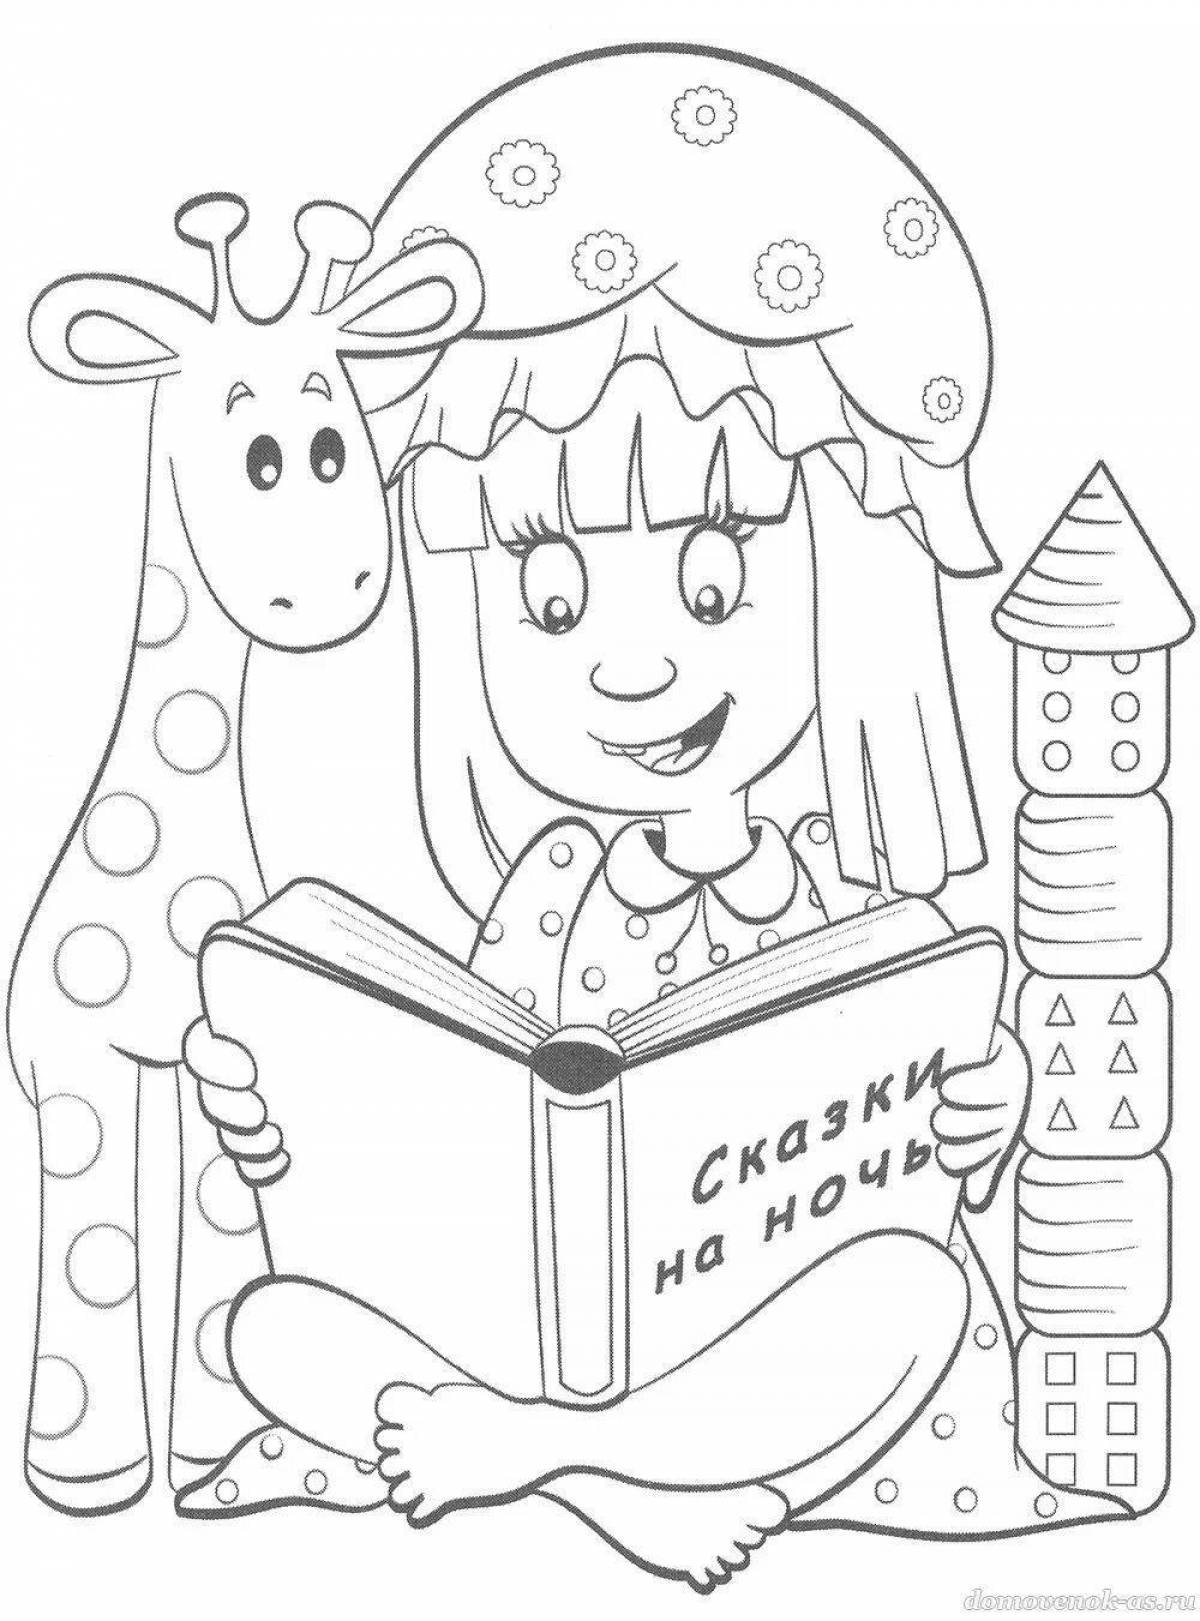 Colorful coloring book cover for kids